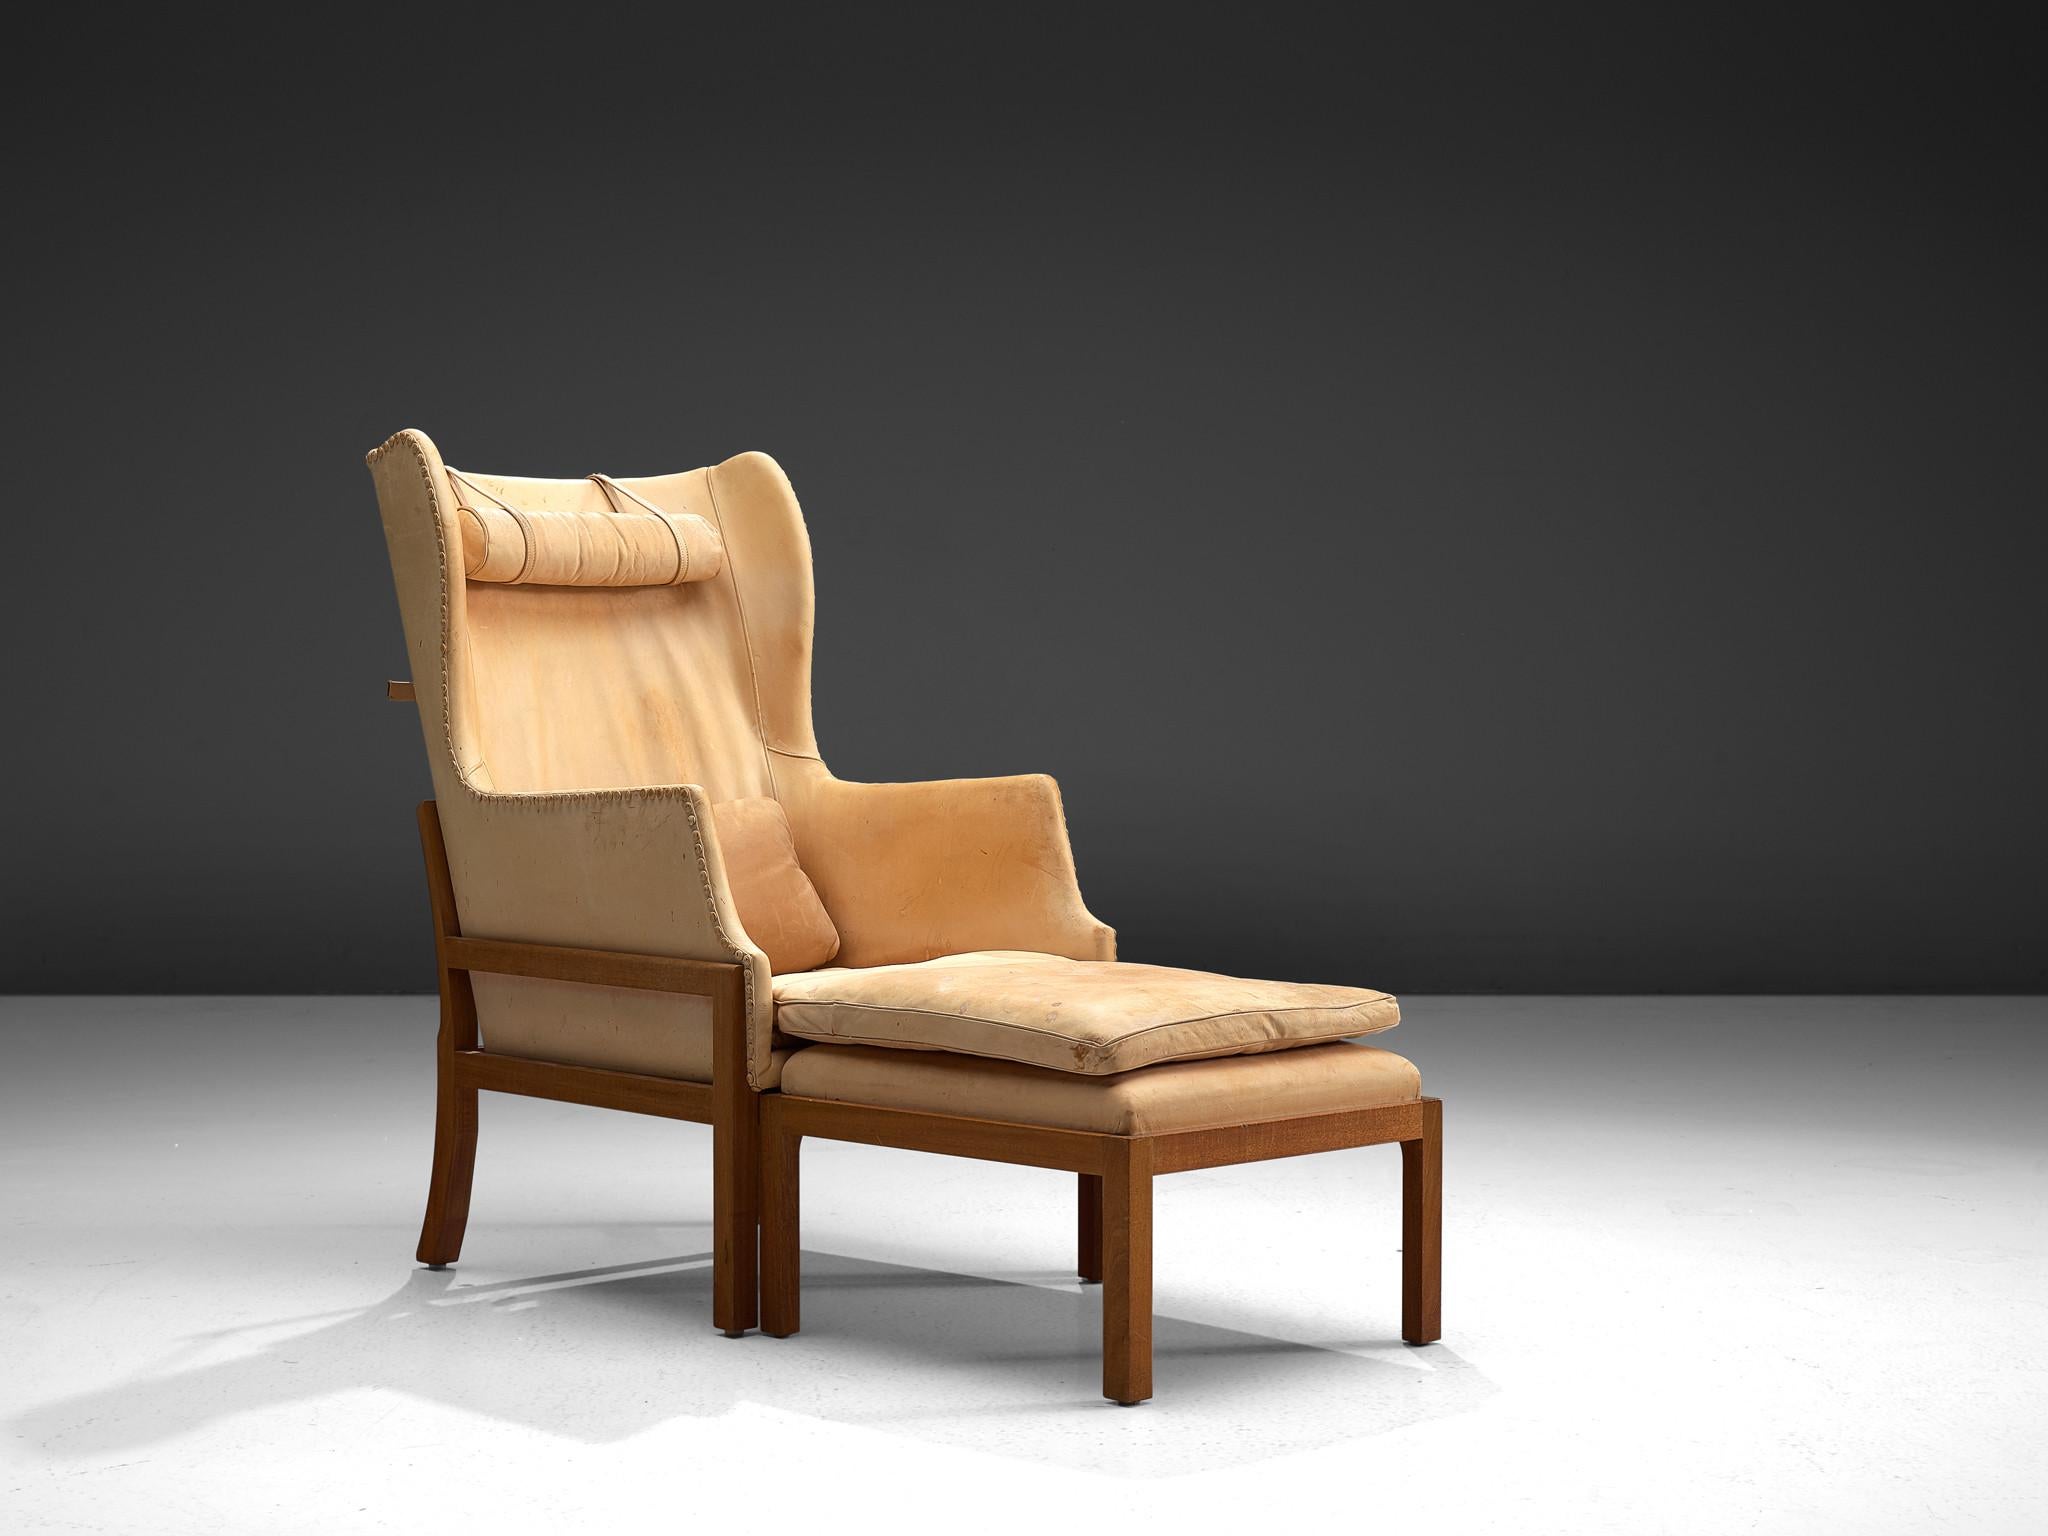 Mogens Koch for Rud Rasmussen, wingback chair and ottoman model MK50, mahogany and leather, Denmark, design 1936, manufactured 1964-1979.

Mogens Koch's wingback chair is inspired by Kaare Klint's furniture design, which in turn is inspired by